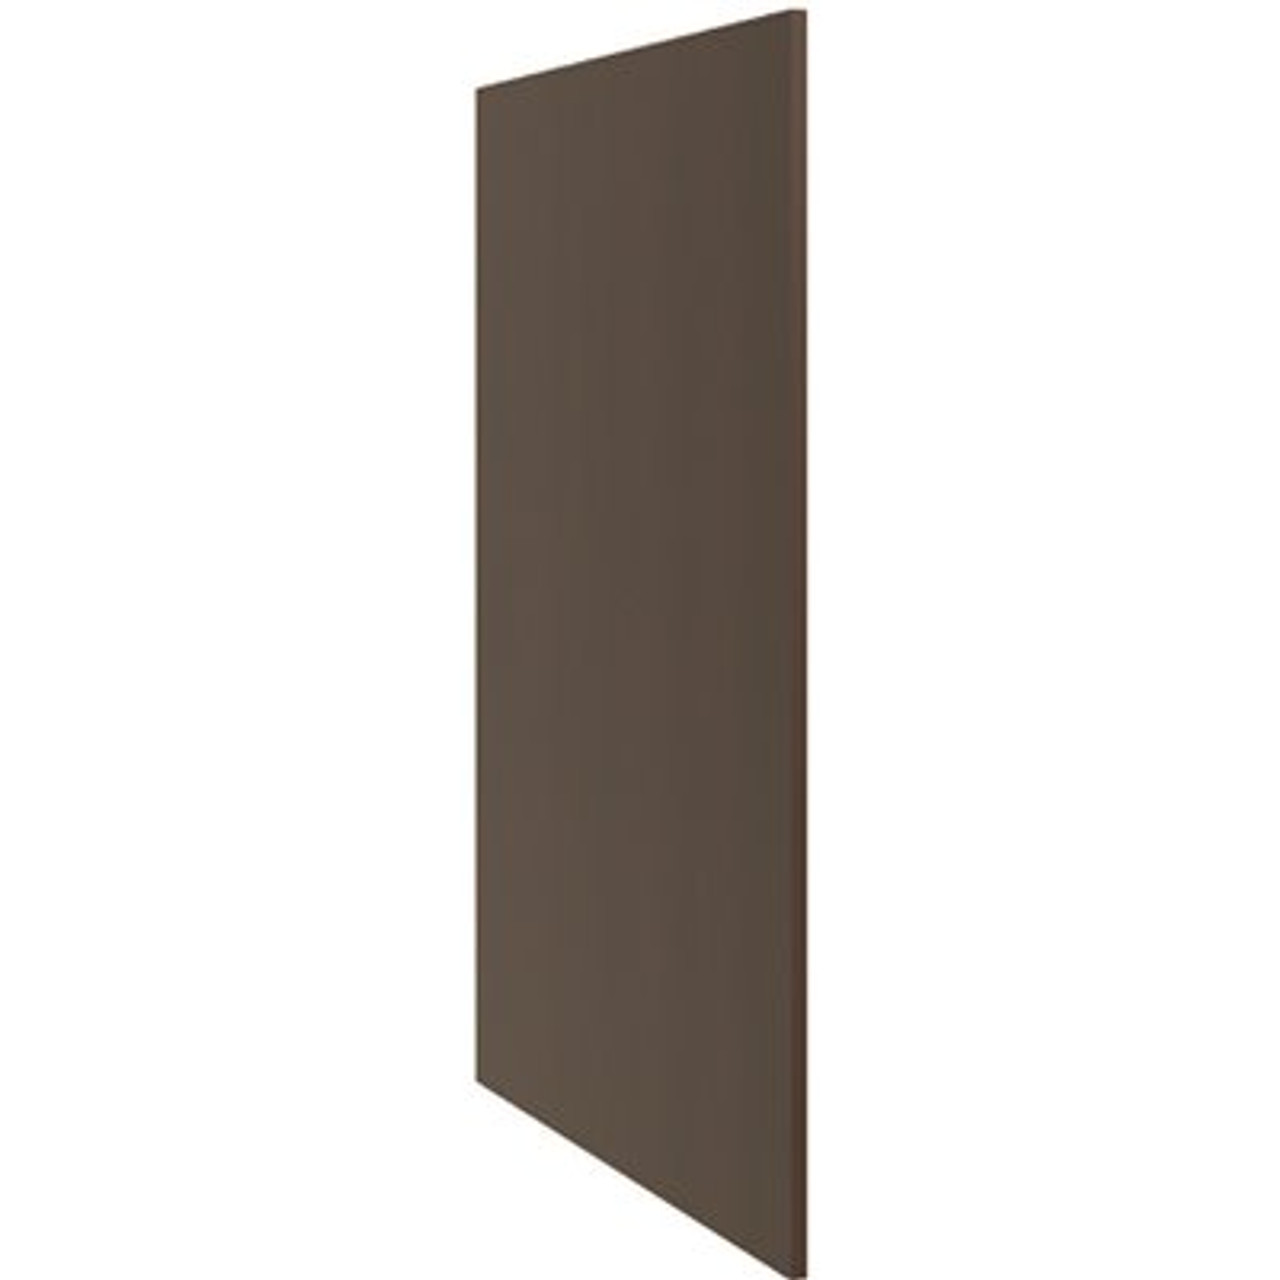 CNC Cabinetry Luxor Wall End Skin, 0.25"w X 30"h X 11.25"d, Shaker Espresso